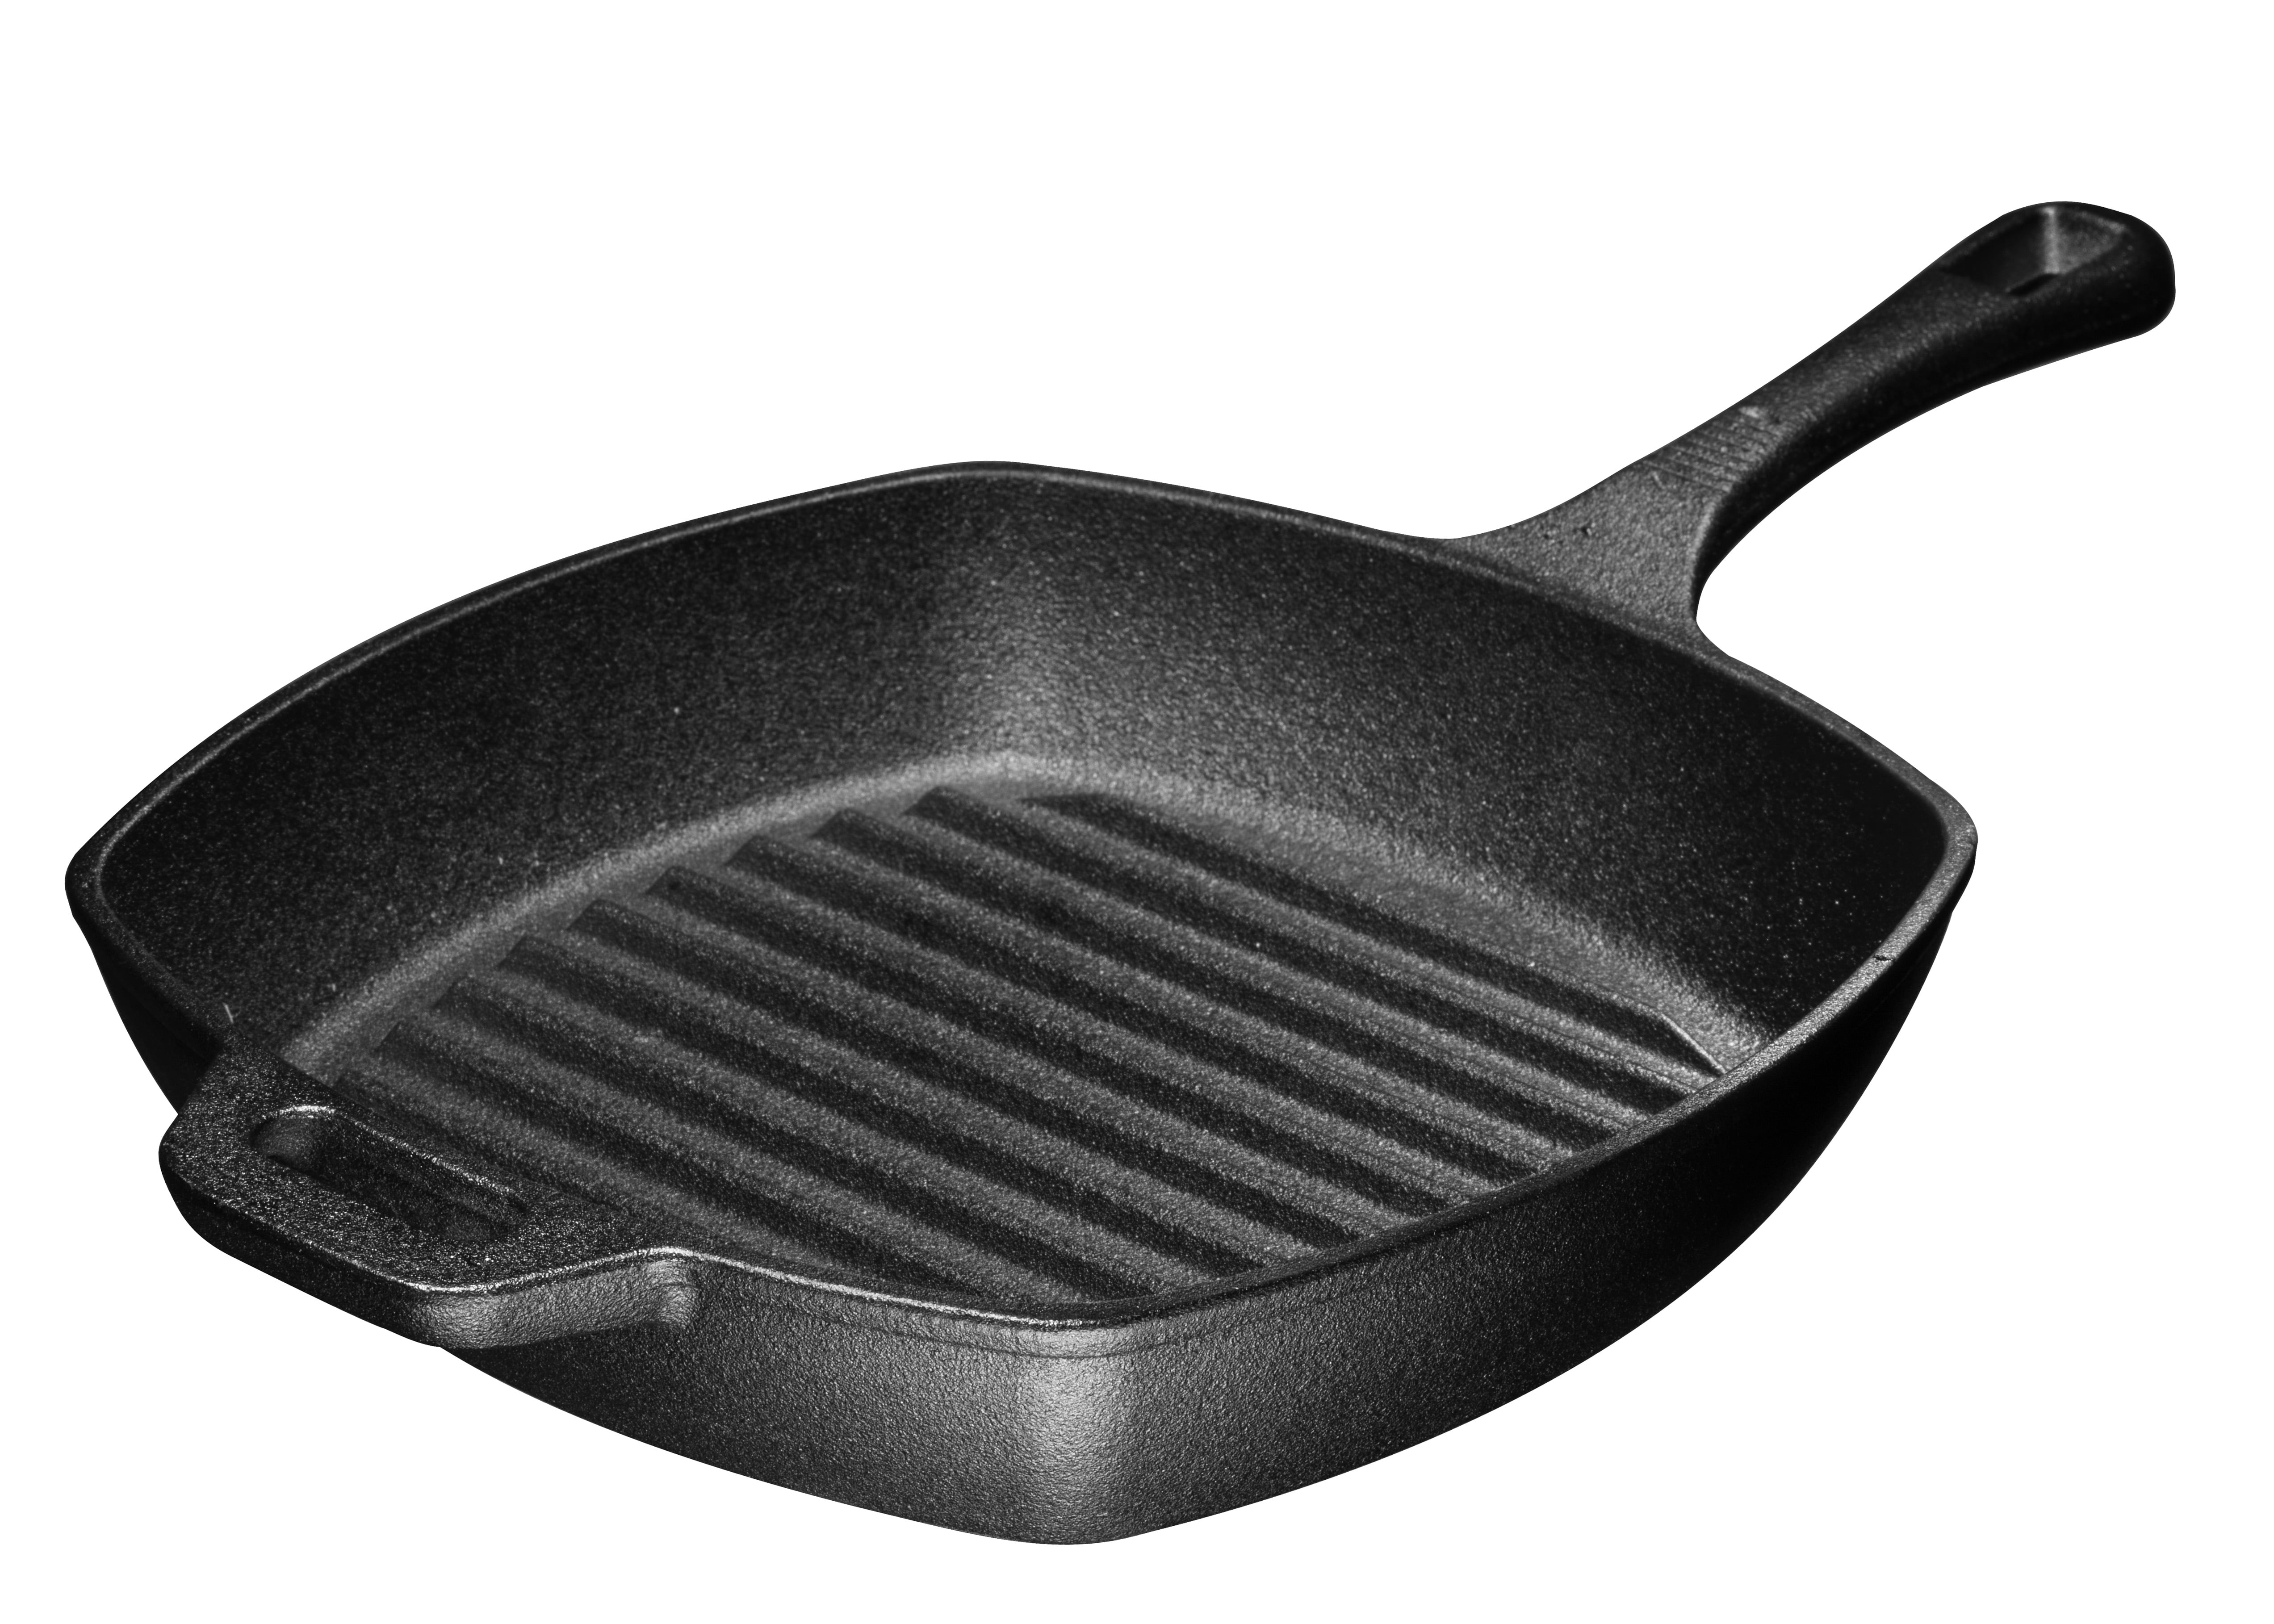 Cast Iron Pan For Grill Steak Grilling BBQ Griddle Oven Stove LODGE Pre Seasoned 